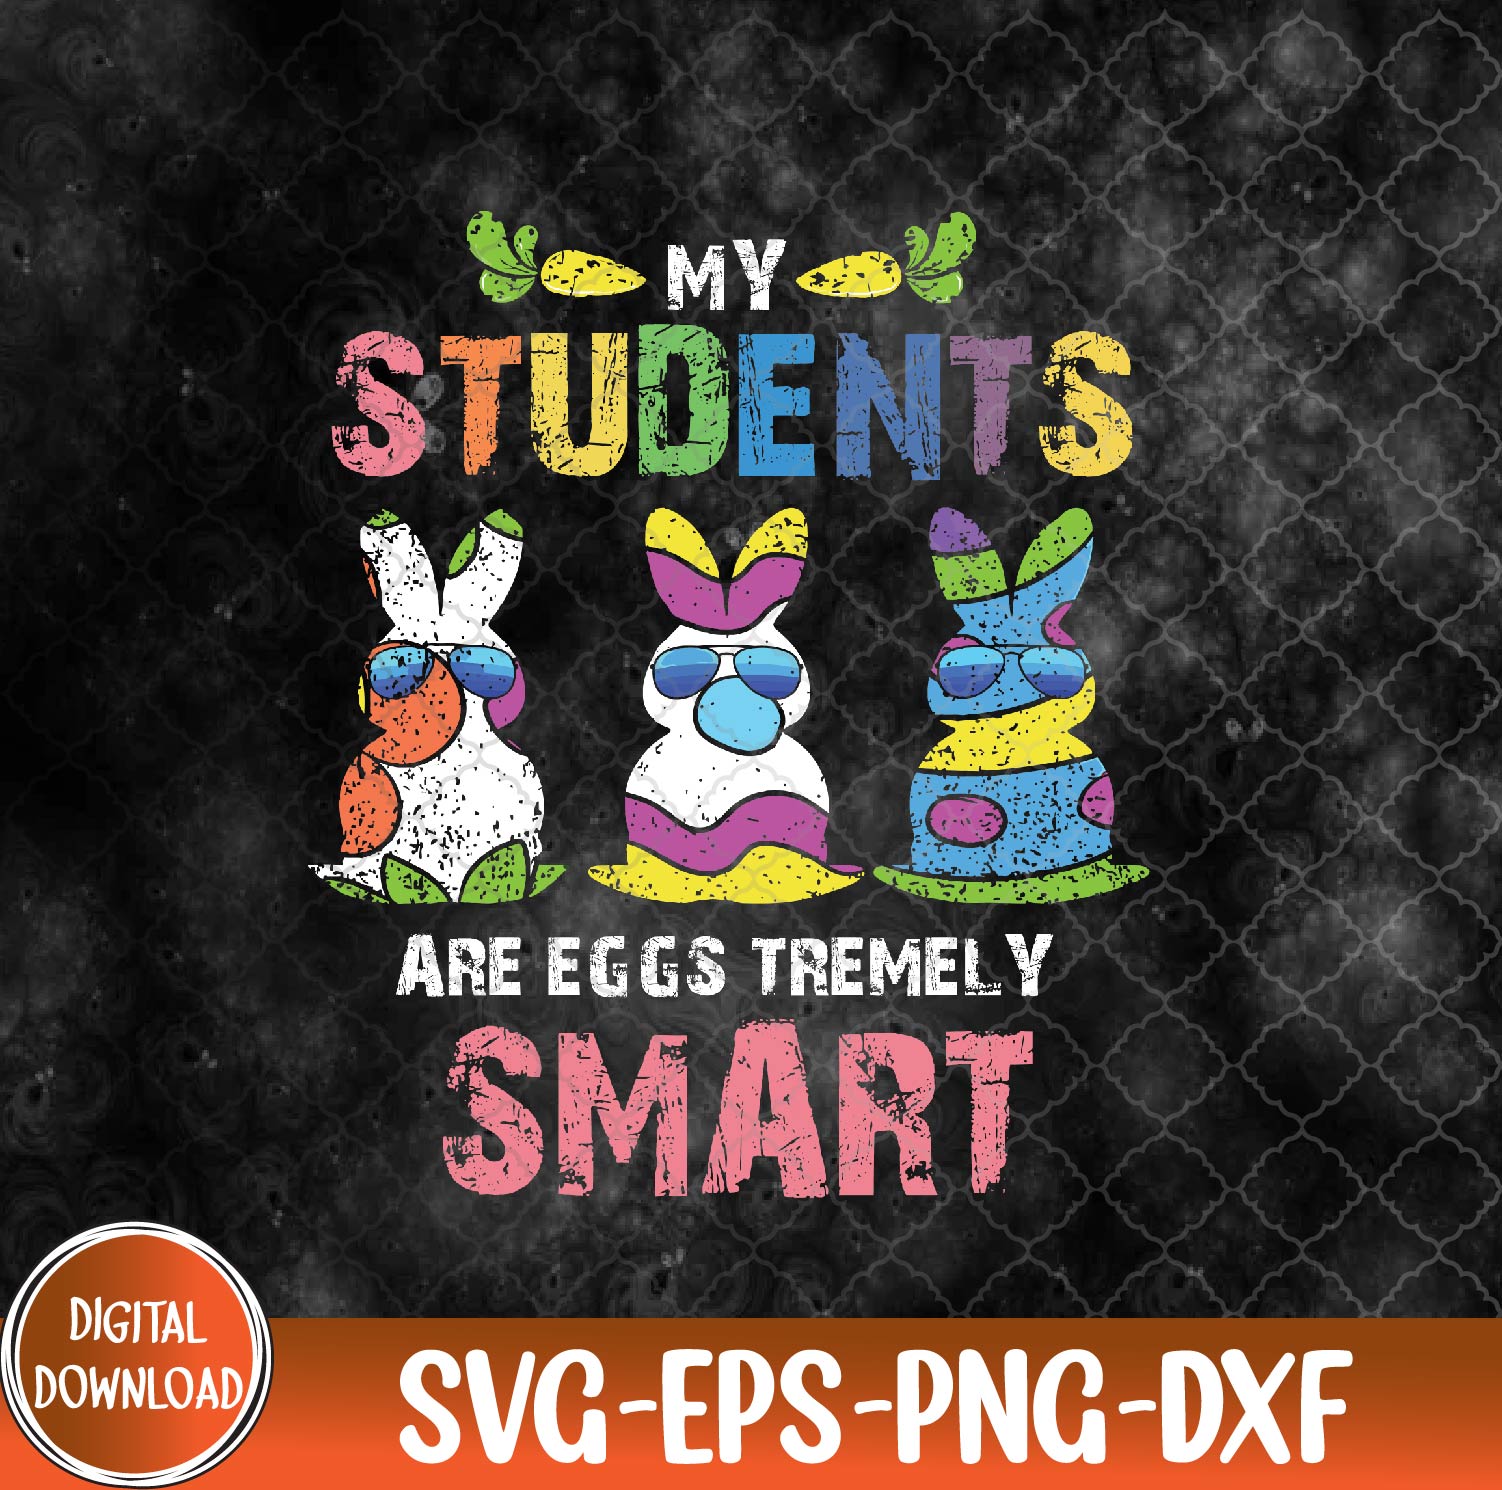 WTMNEW9file 09 34 My Students Are Eggstremely Smart Cute Easter Day Teacher Svg, Eps, Png, Dxf